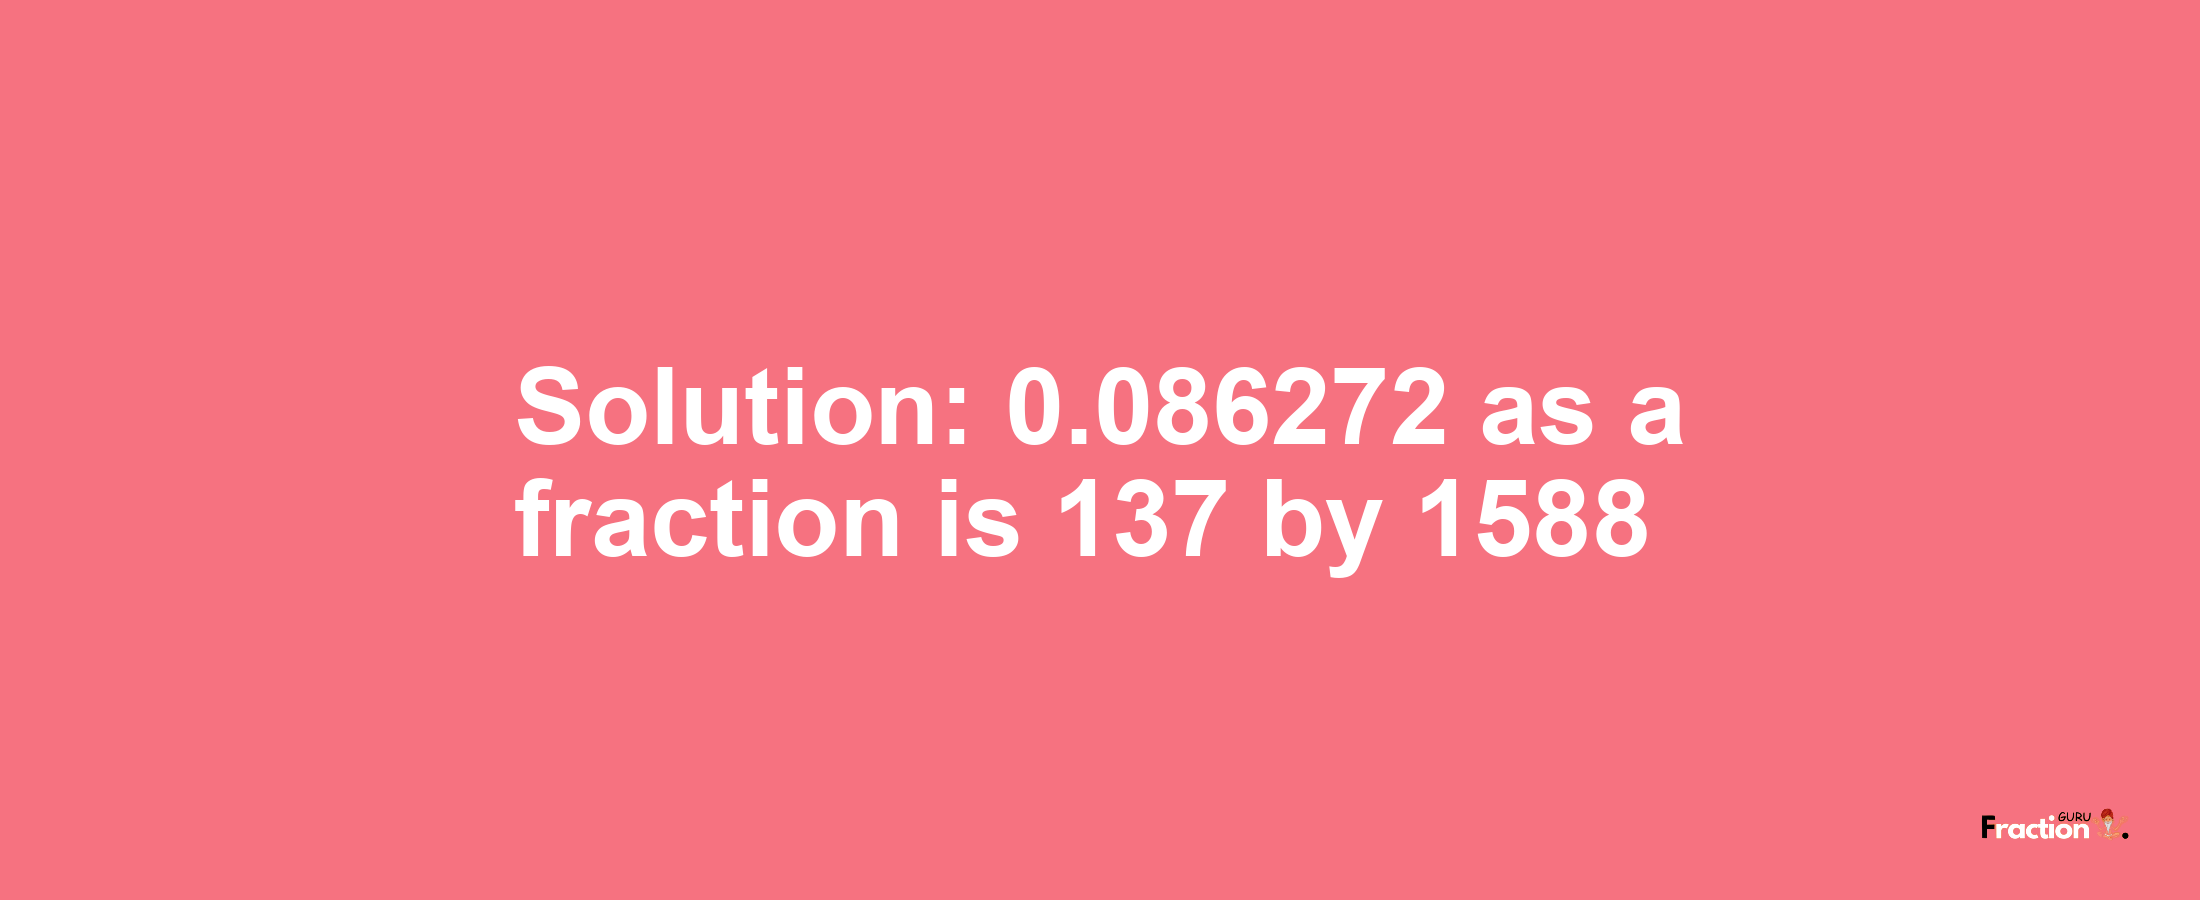 Solution:0.086272 as a fraction is 137/1588